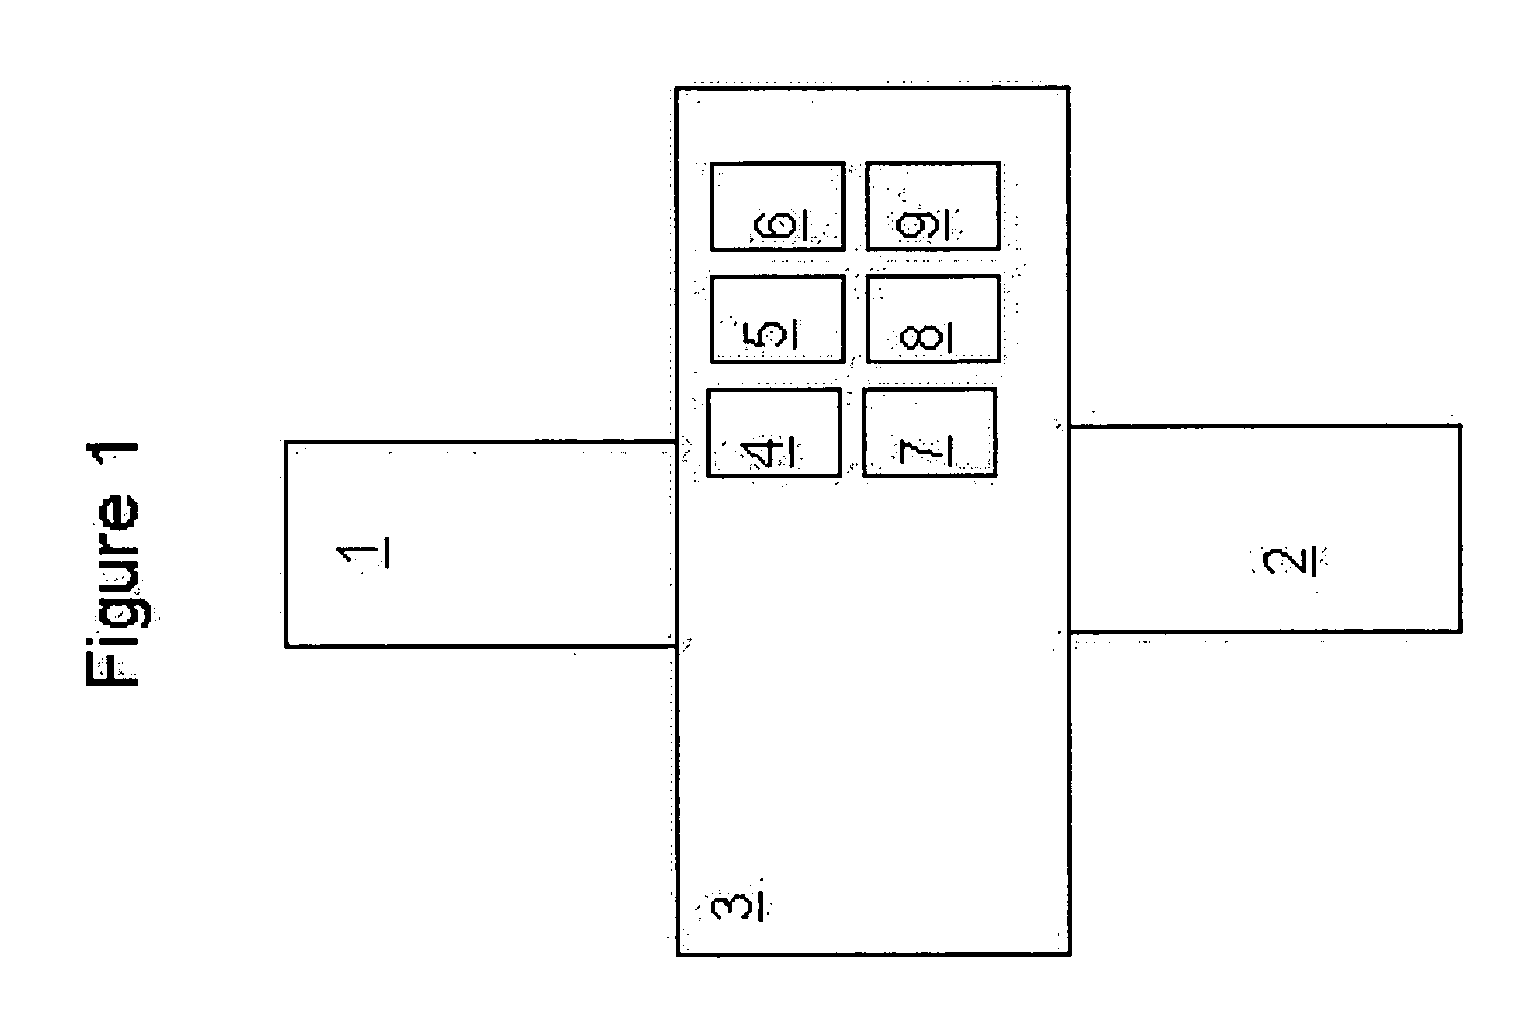 Thermoelectric power source utilizing ambient energy harvesting for remote sensing and transmitting